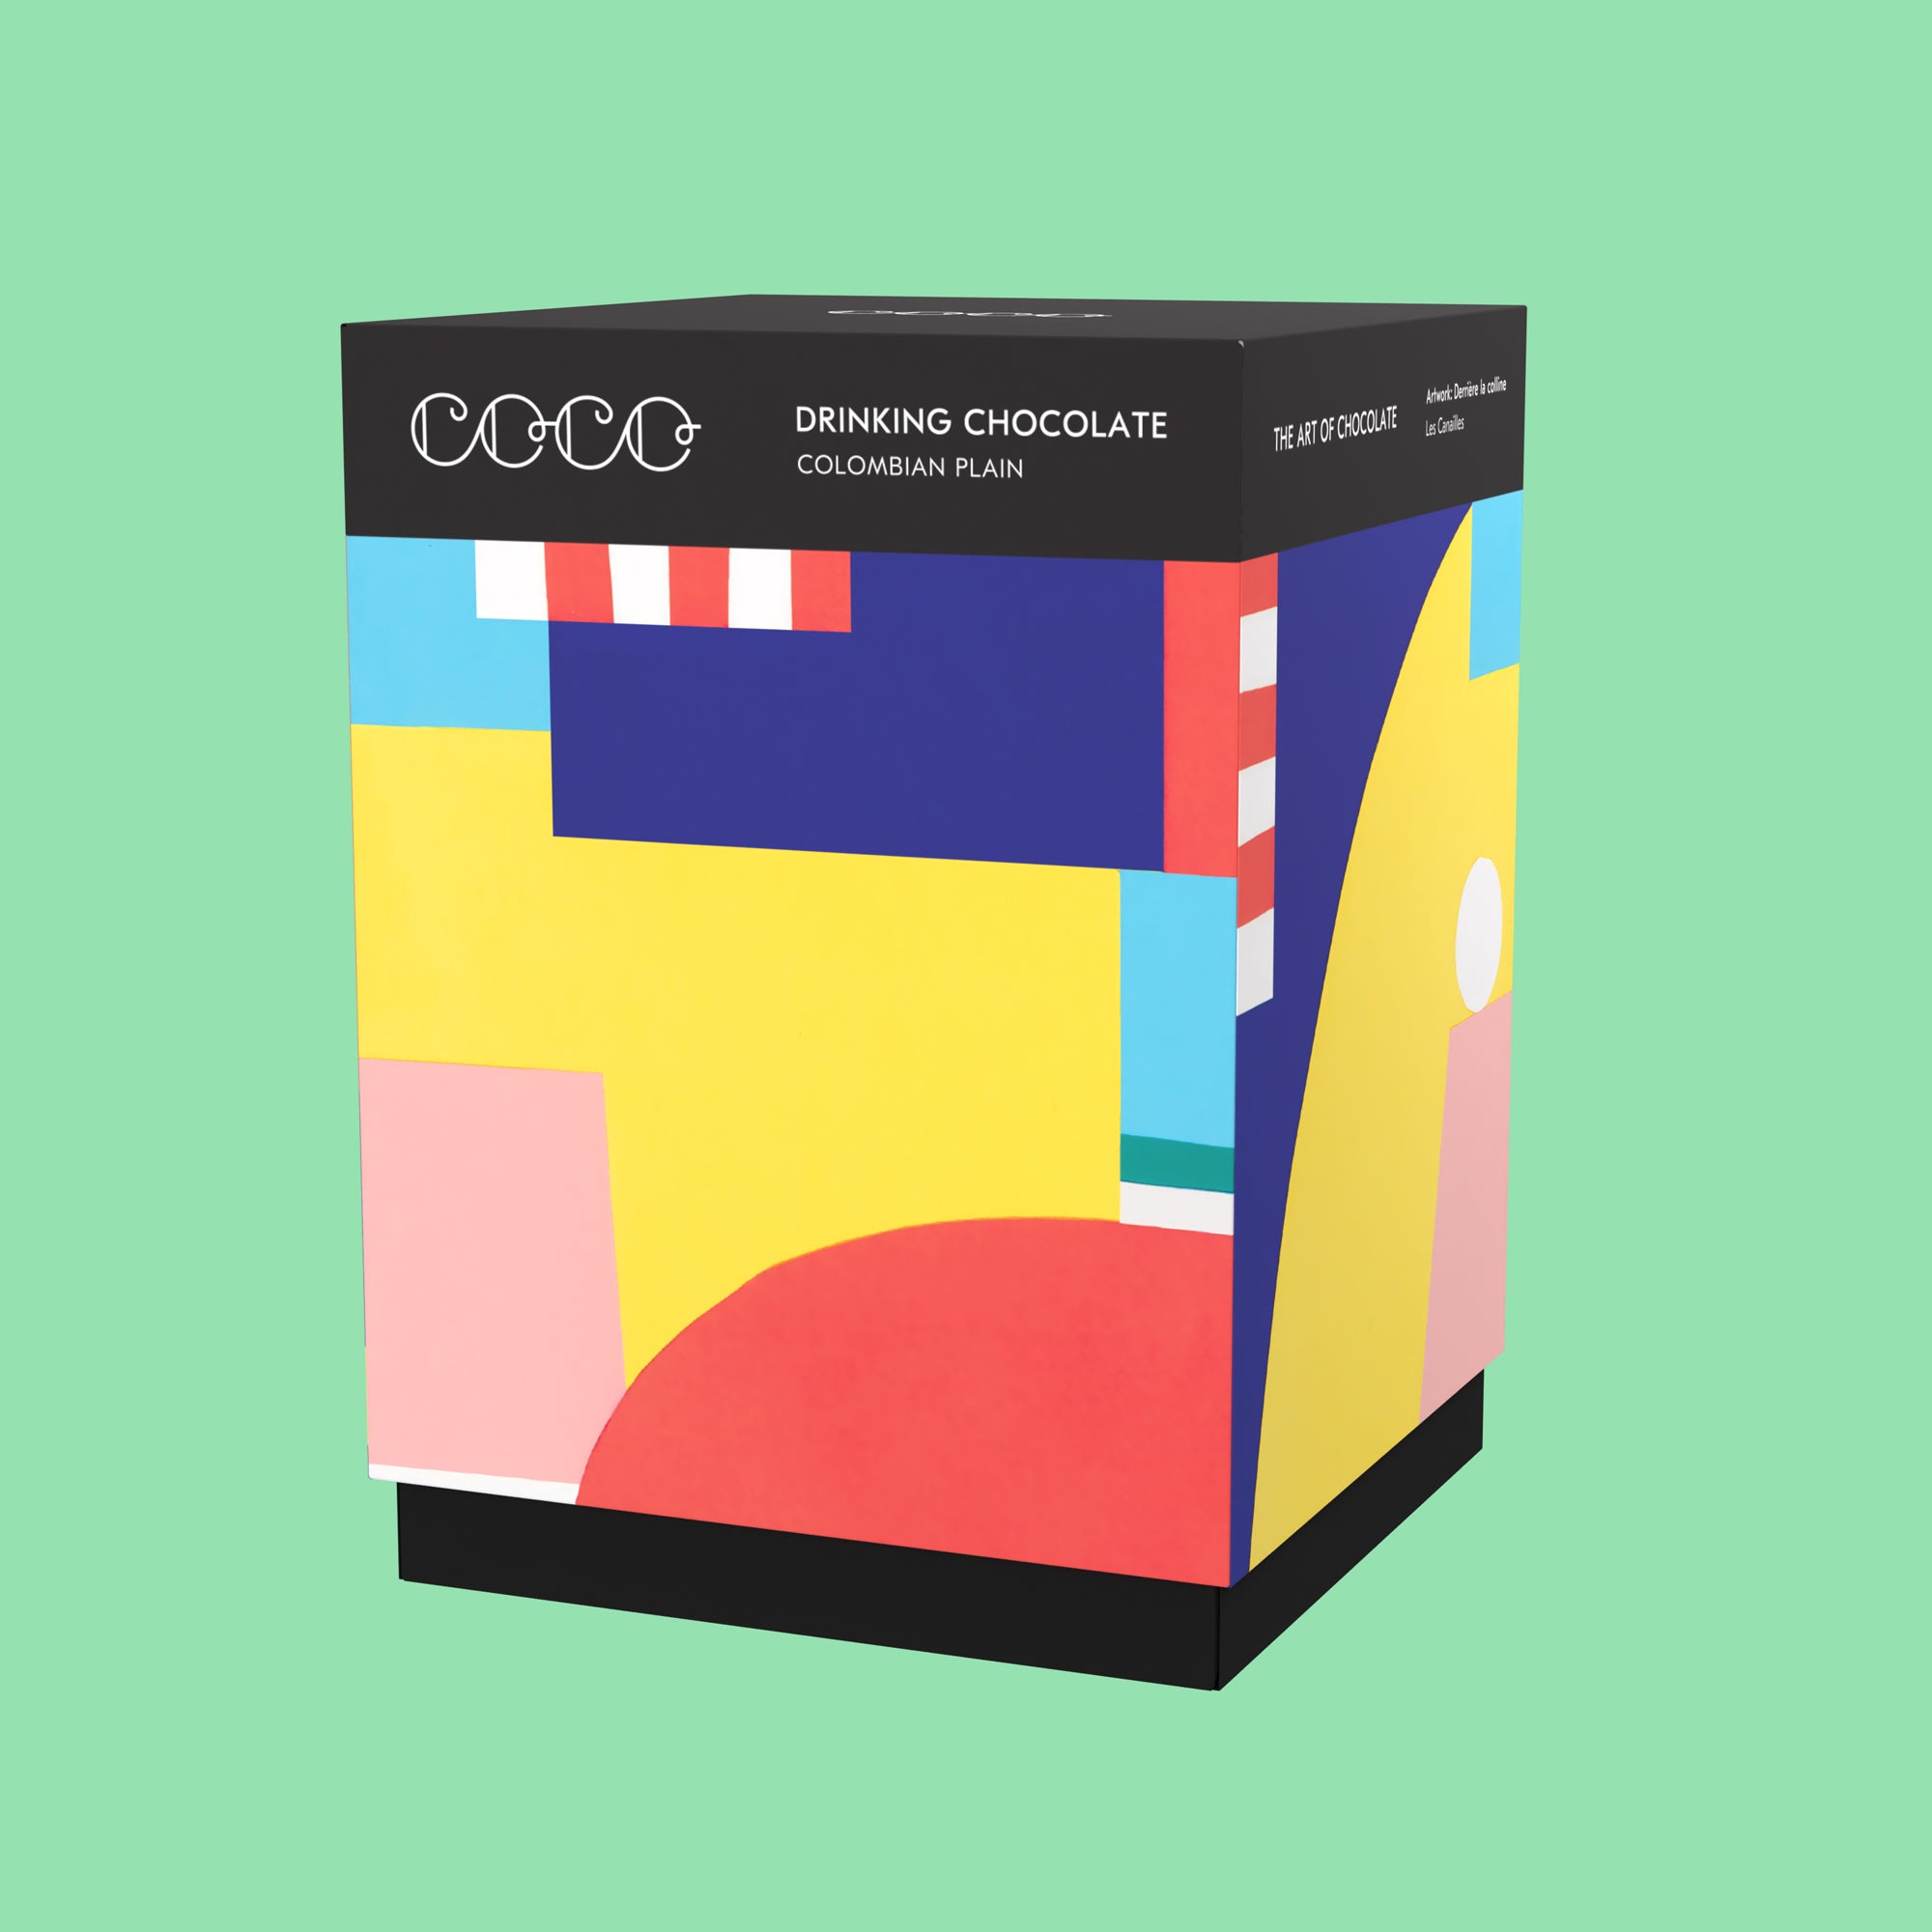 COCO Colombian Plain Drinking Chocolate